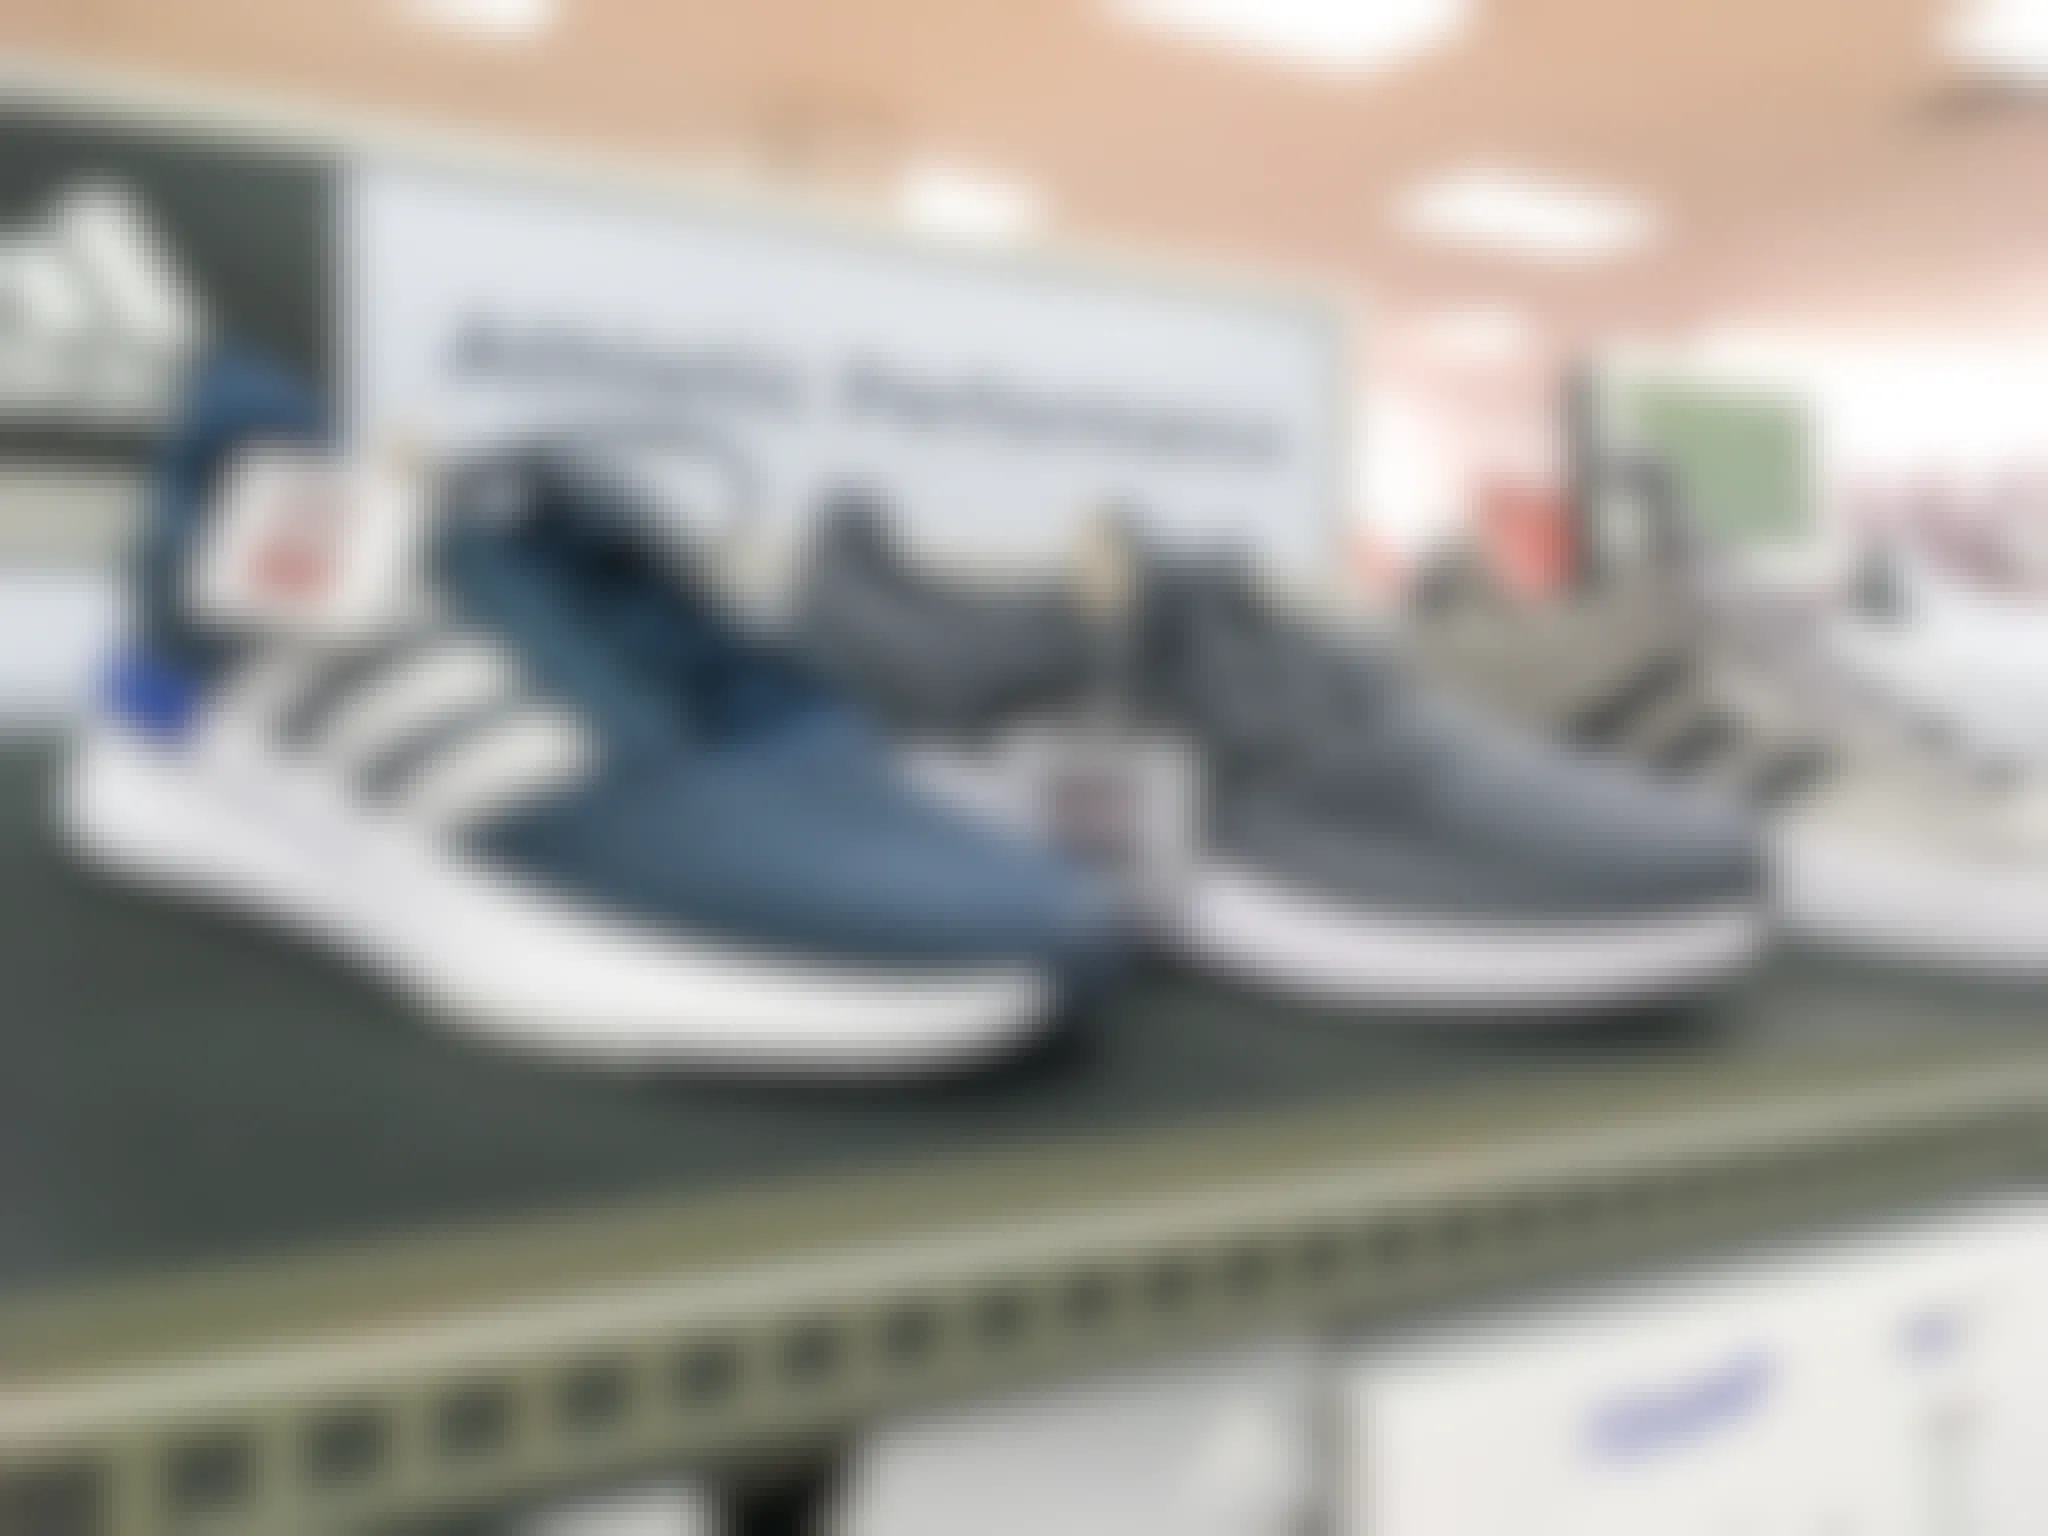 Adidas sneakers on display in the shoe section of Kohl's